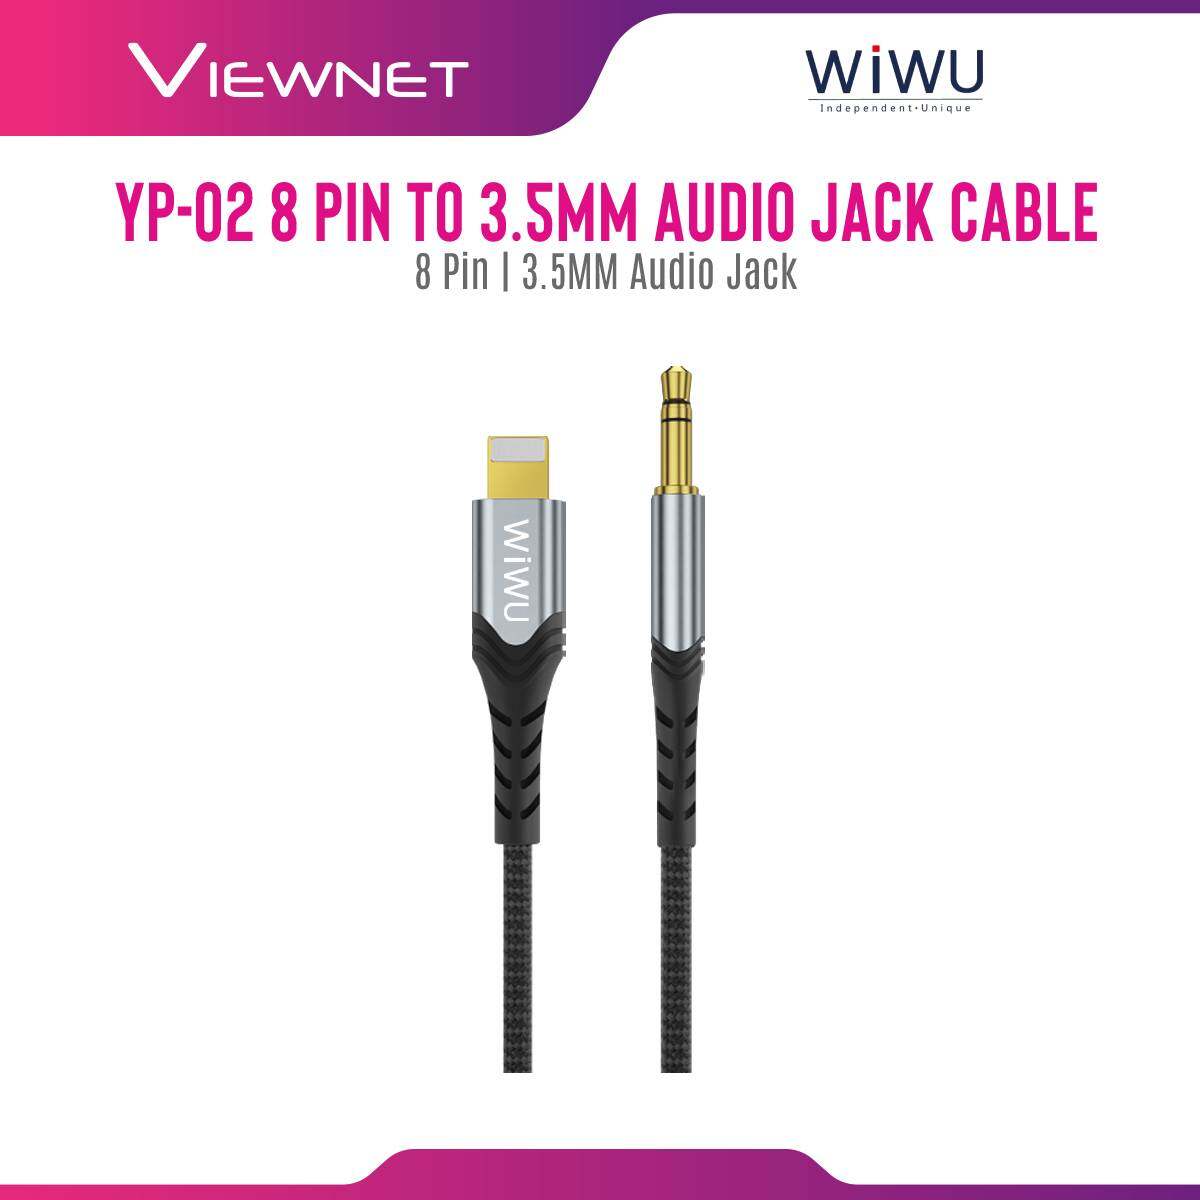 Wiwu YP-02 8 Pin to 3.5MM Audio Jack Cable / YP-03 Type-c to 3.5MM Audio Cable 1.5m